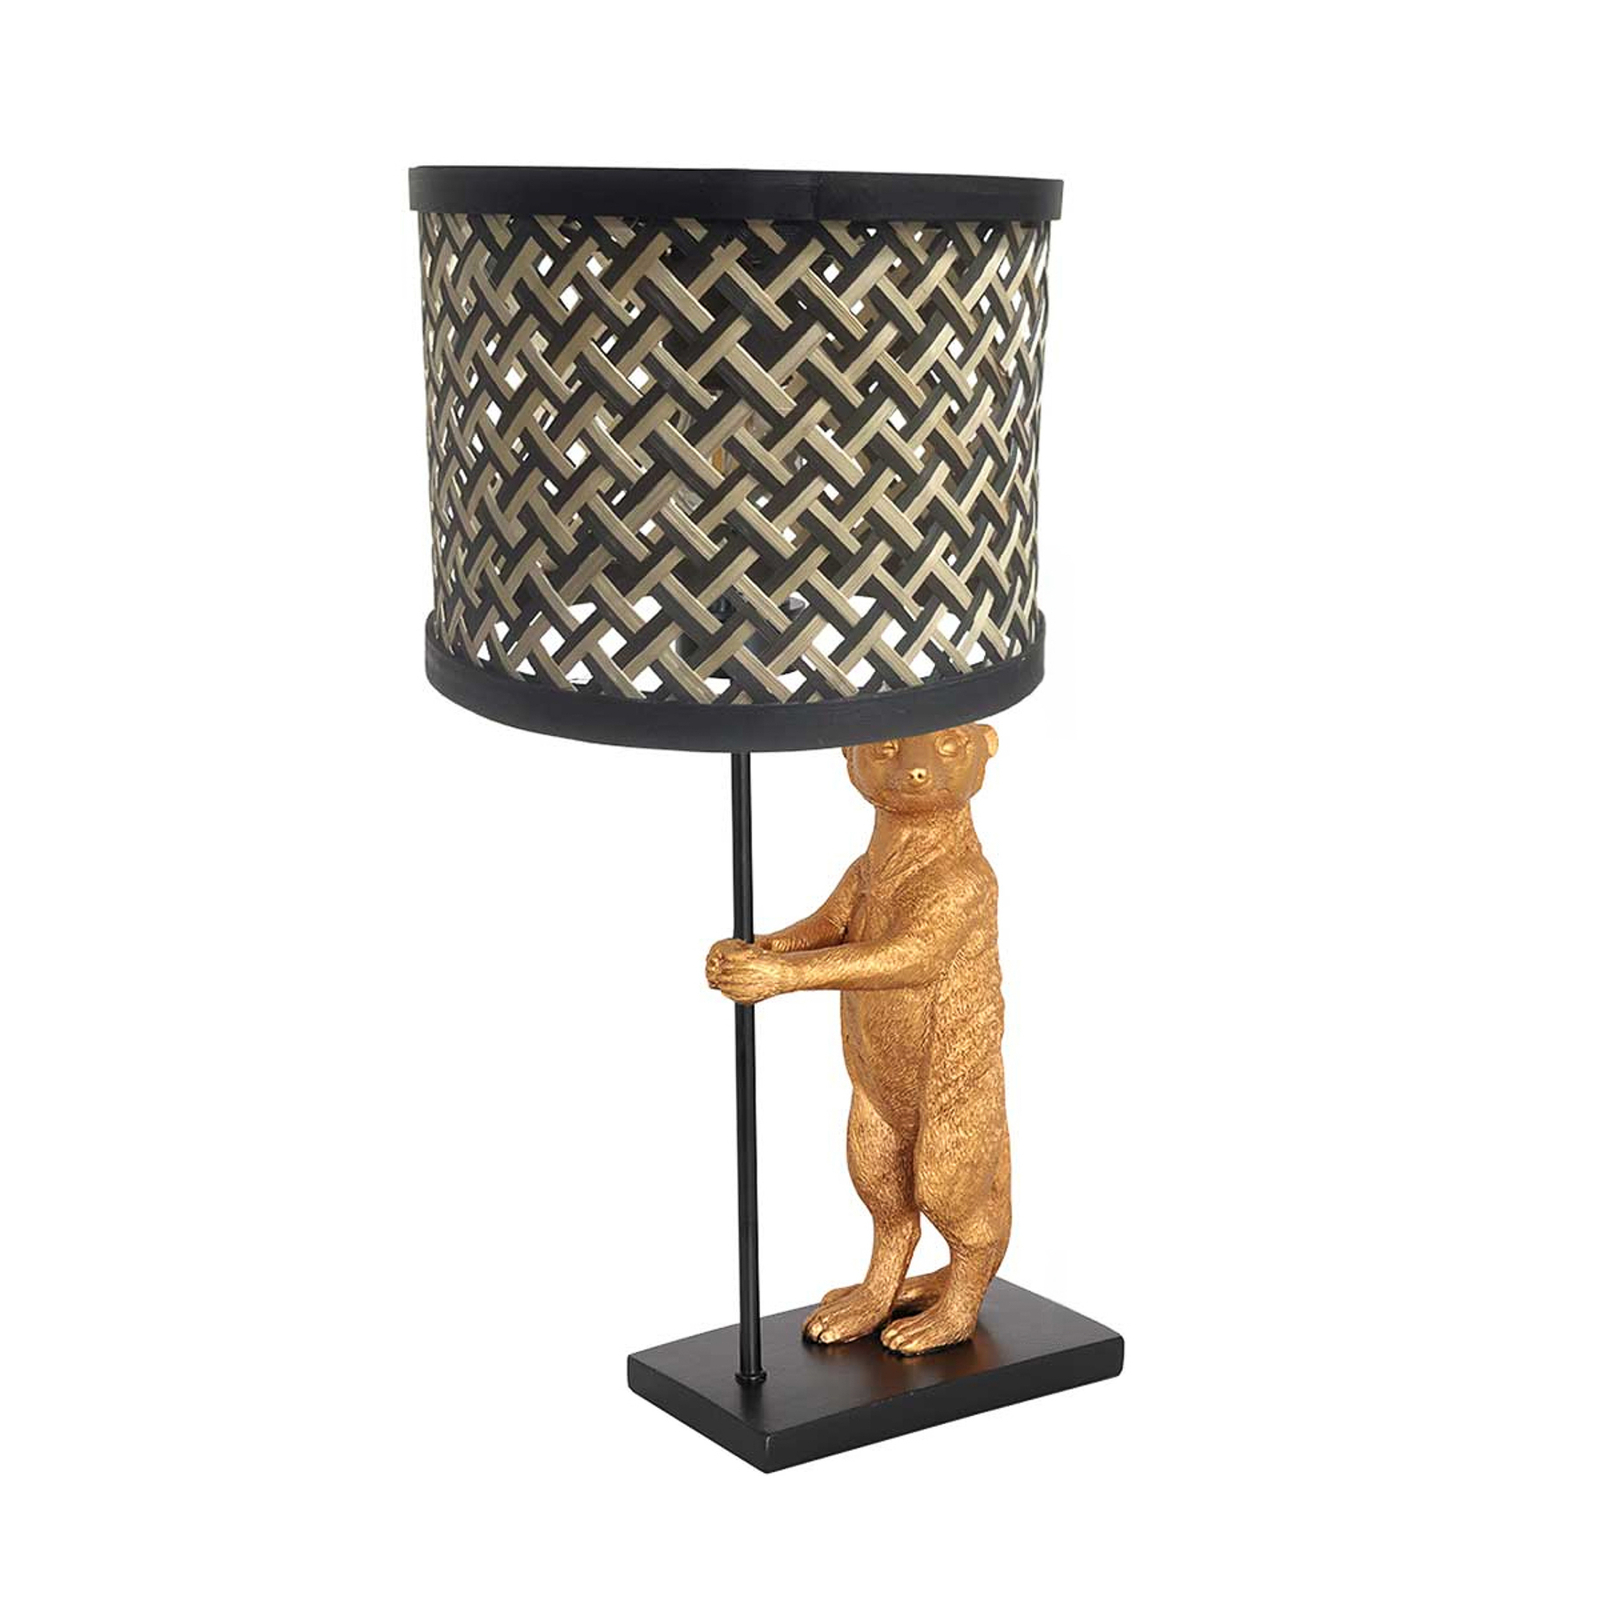 Animaux 3711ZW table lamp, black/natural wickerwork